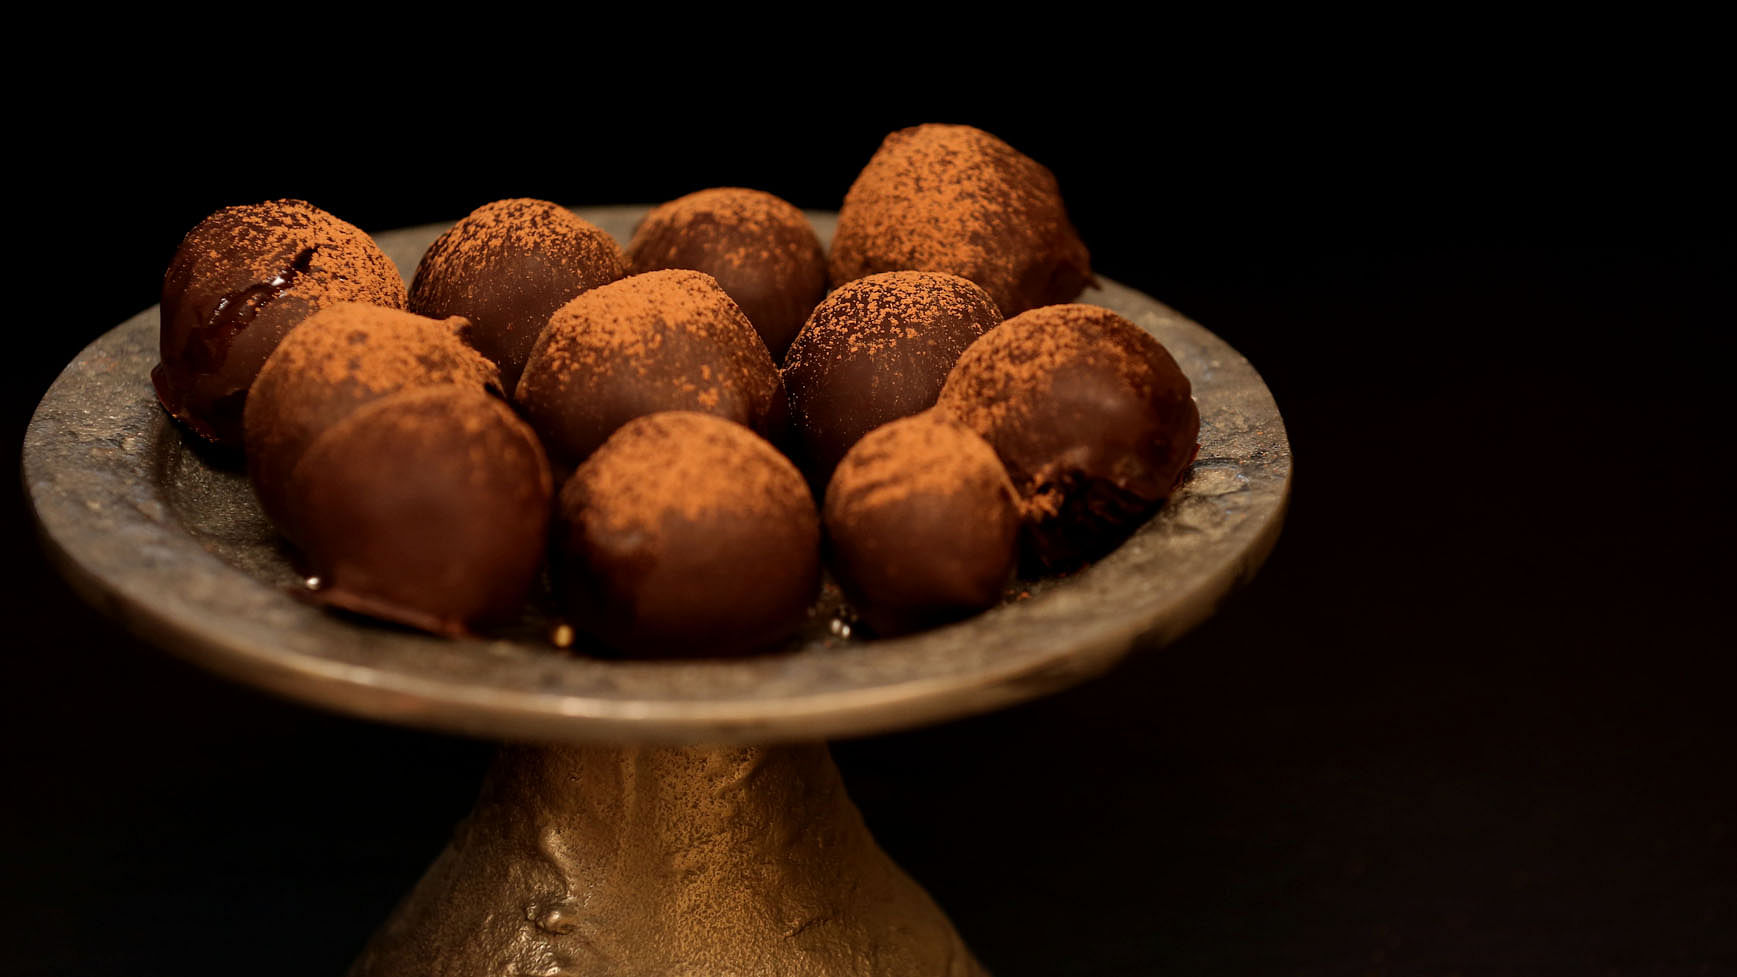 Easy to make chocolate rum balls. (Photo: The Quint)